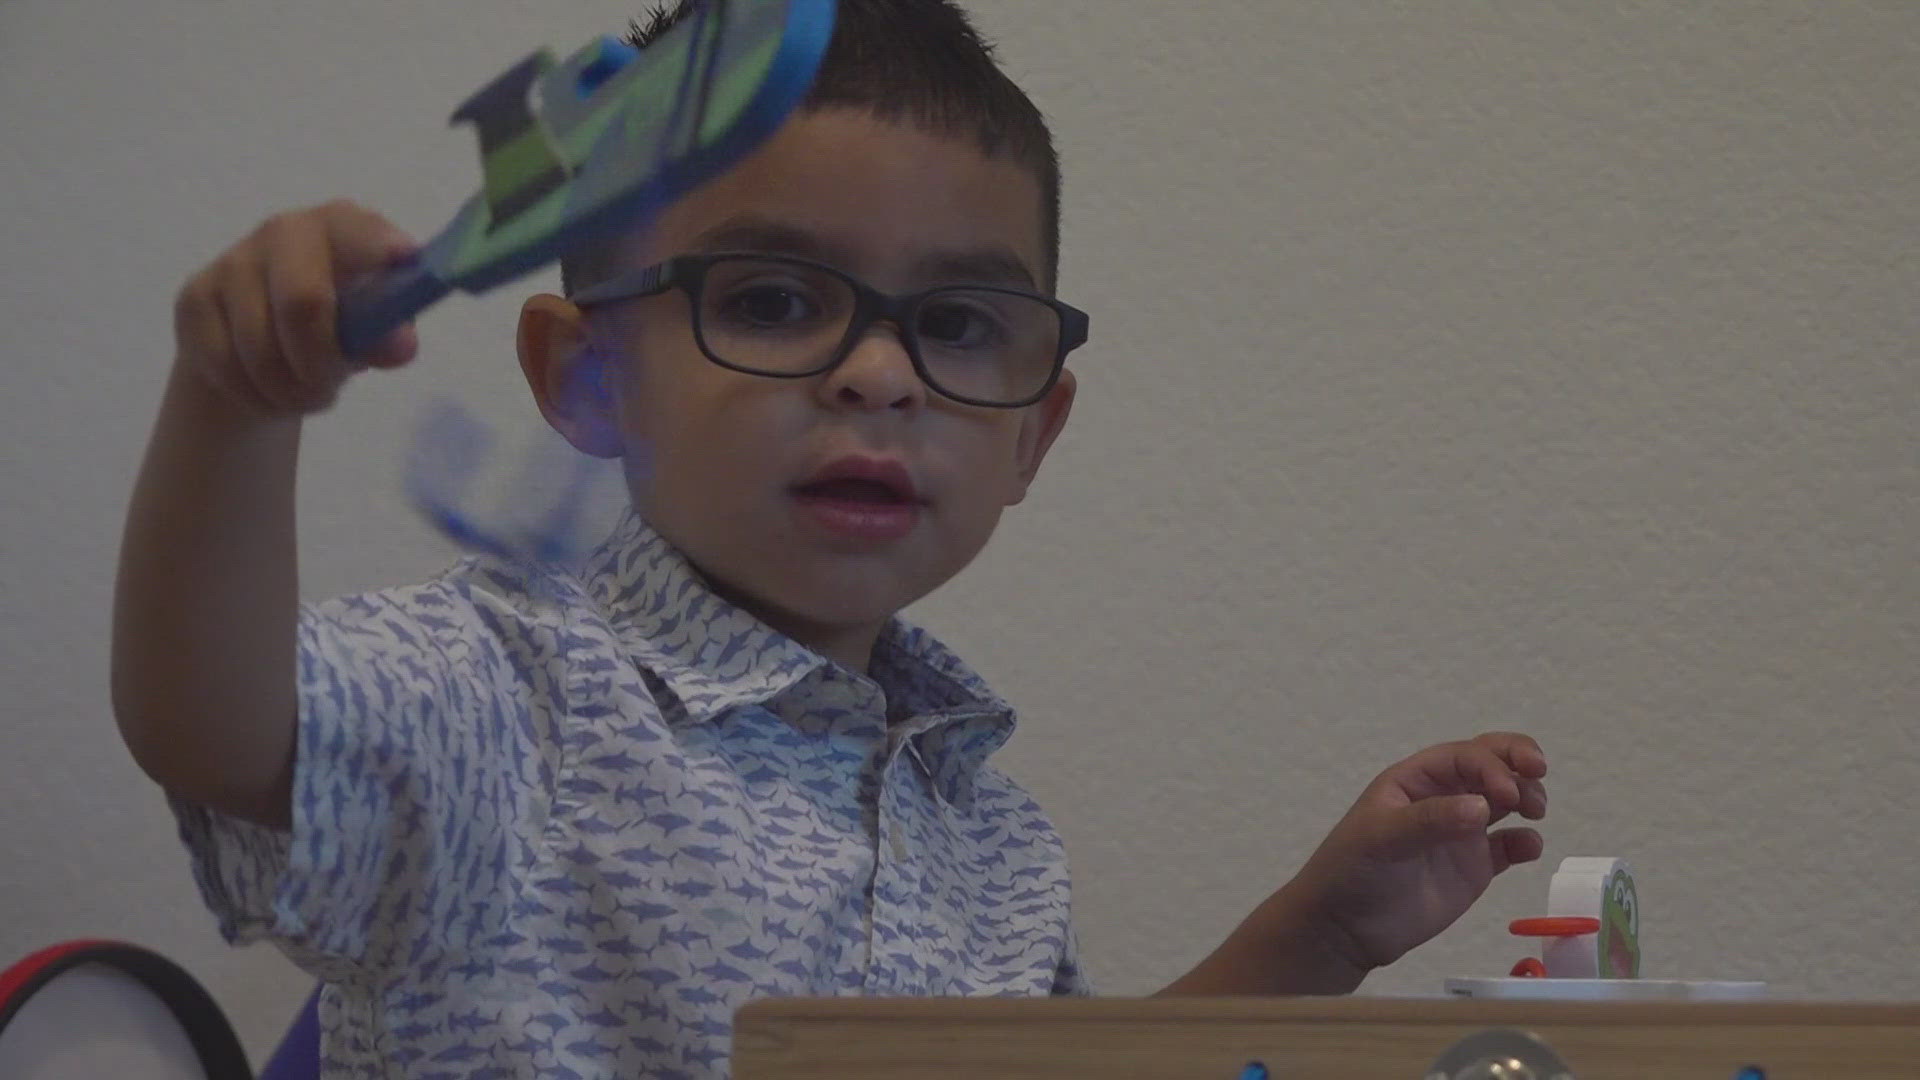 "It's unbelievable that a child who has four tumors in his eyes can see," said Miguel Orozco's mom Berenice Orozco.